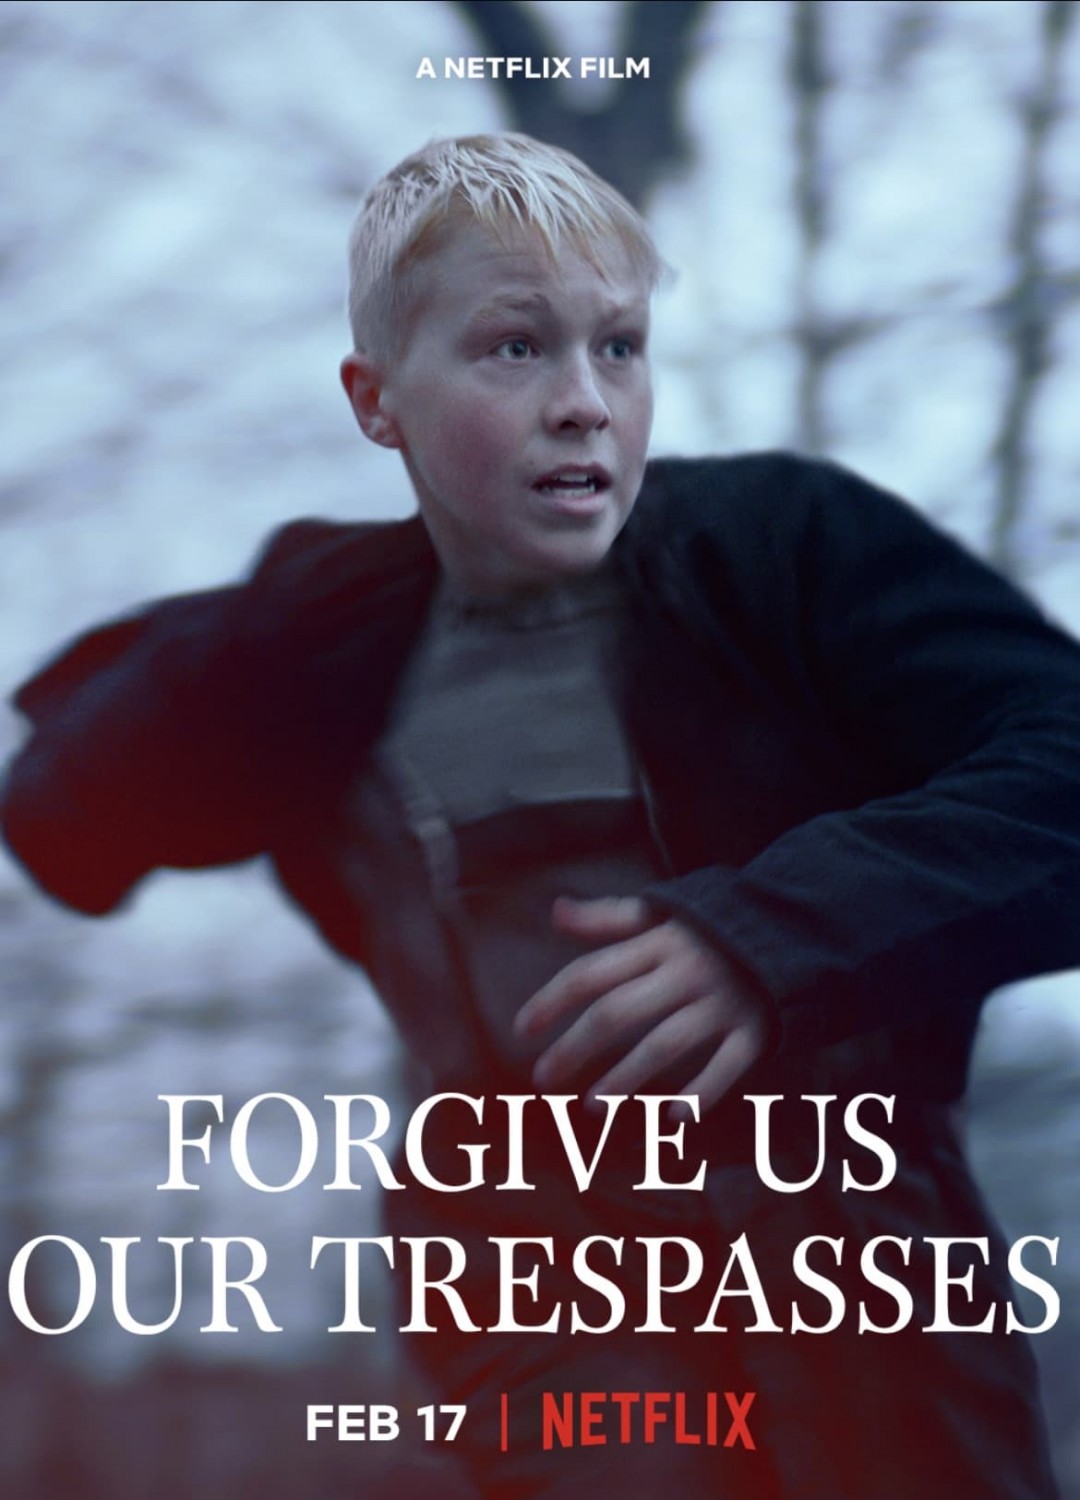 Extra Large Movie Poster Image for Forgive Us Our Trespasses